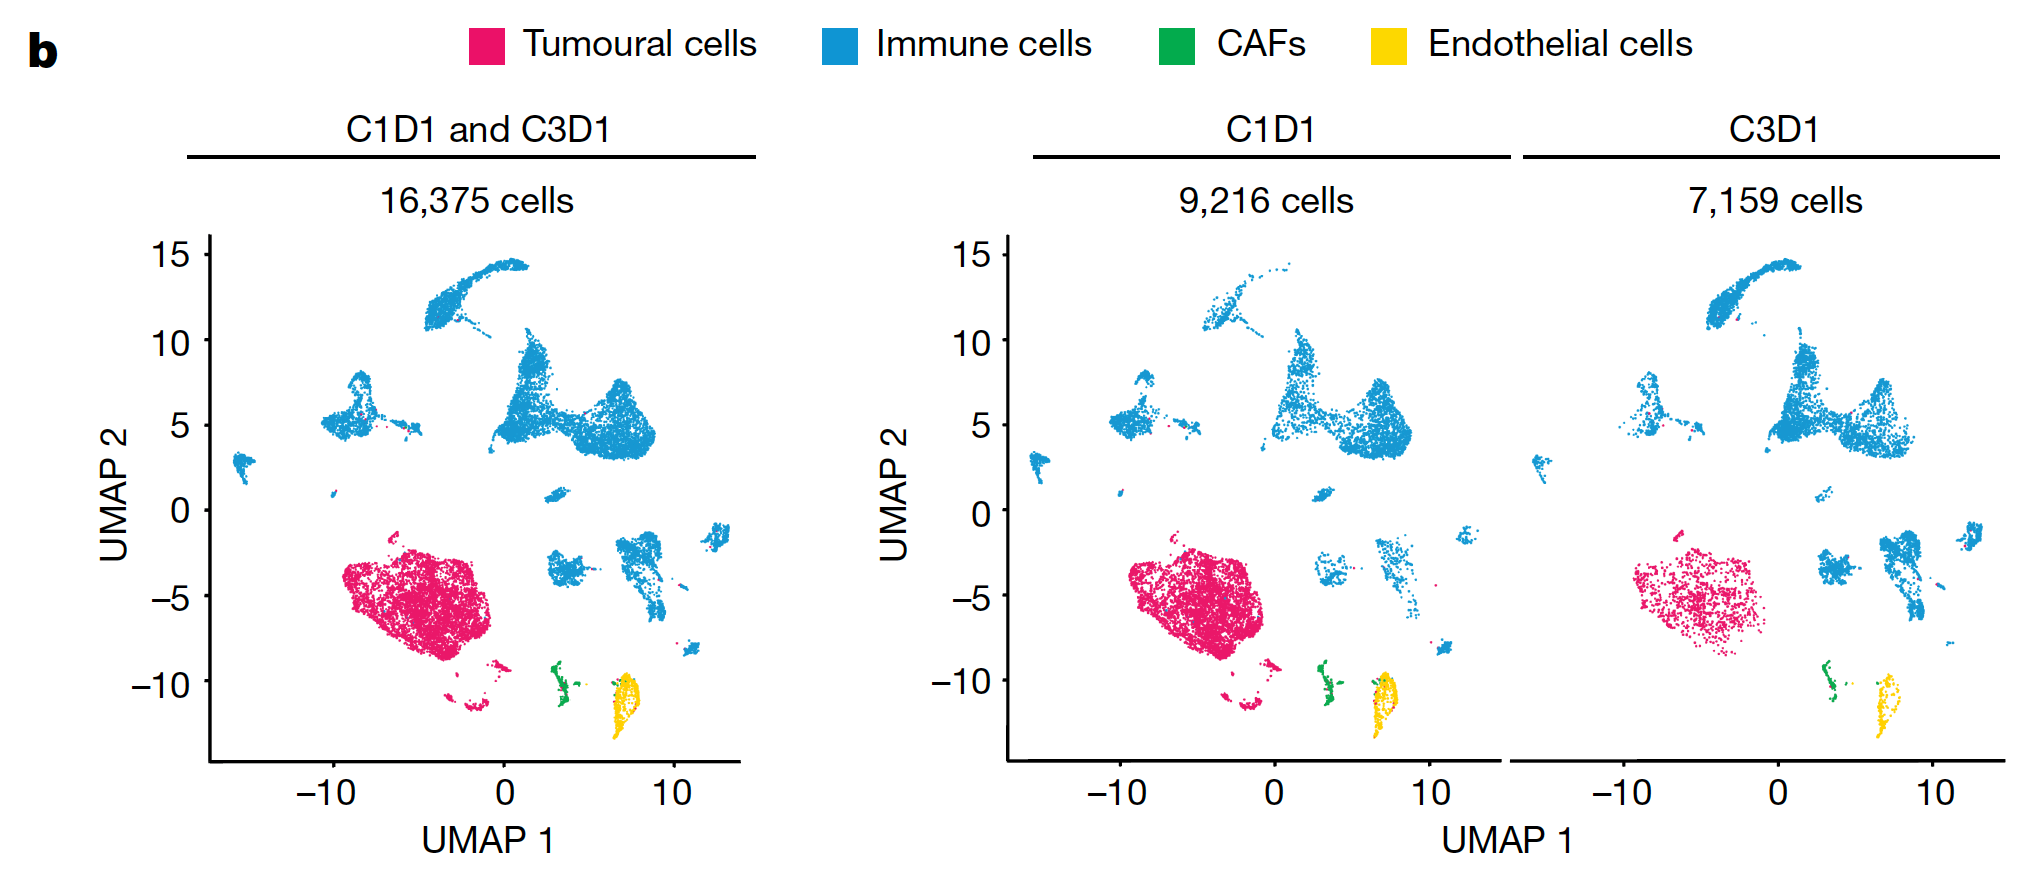 Figure 4b from Cassier et al. showing a UMAP plot of 16,375 cells from two lung metastasis biopsies (left). The pre-treatment sample contains 9,216 cells (C1D1, middle), and the post-treatment sample contains 7,159 cells (C3D1, right), colored by four major cell types. Note the reduction in tumor cells after treatment. Credit: Cassier P, et al. Nature 620: 409–416 (2023). doi: 10.1038/s41586-023-06367-z (CC BY 4.0). 